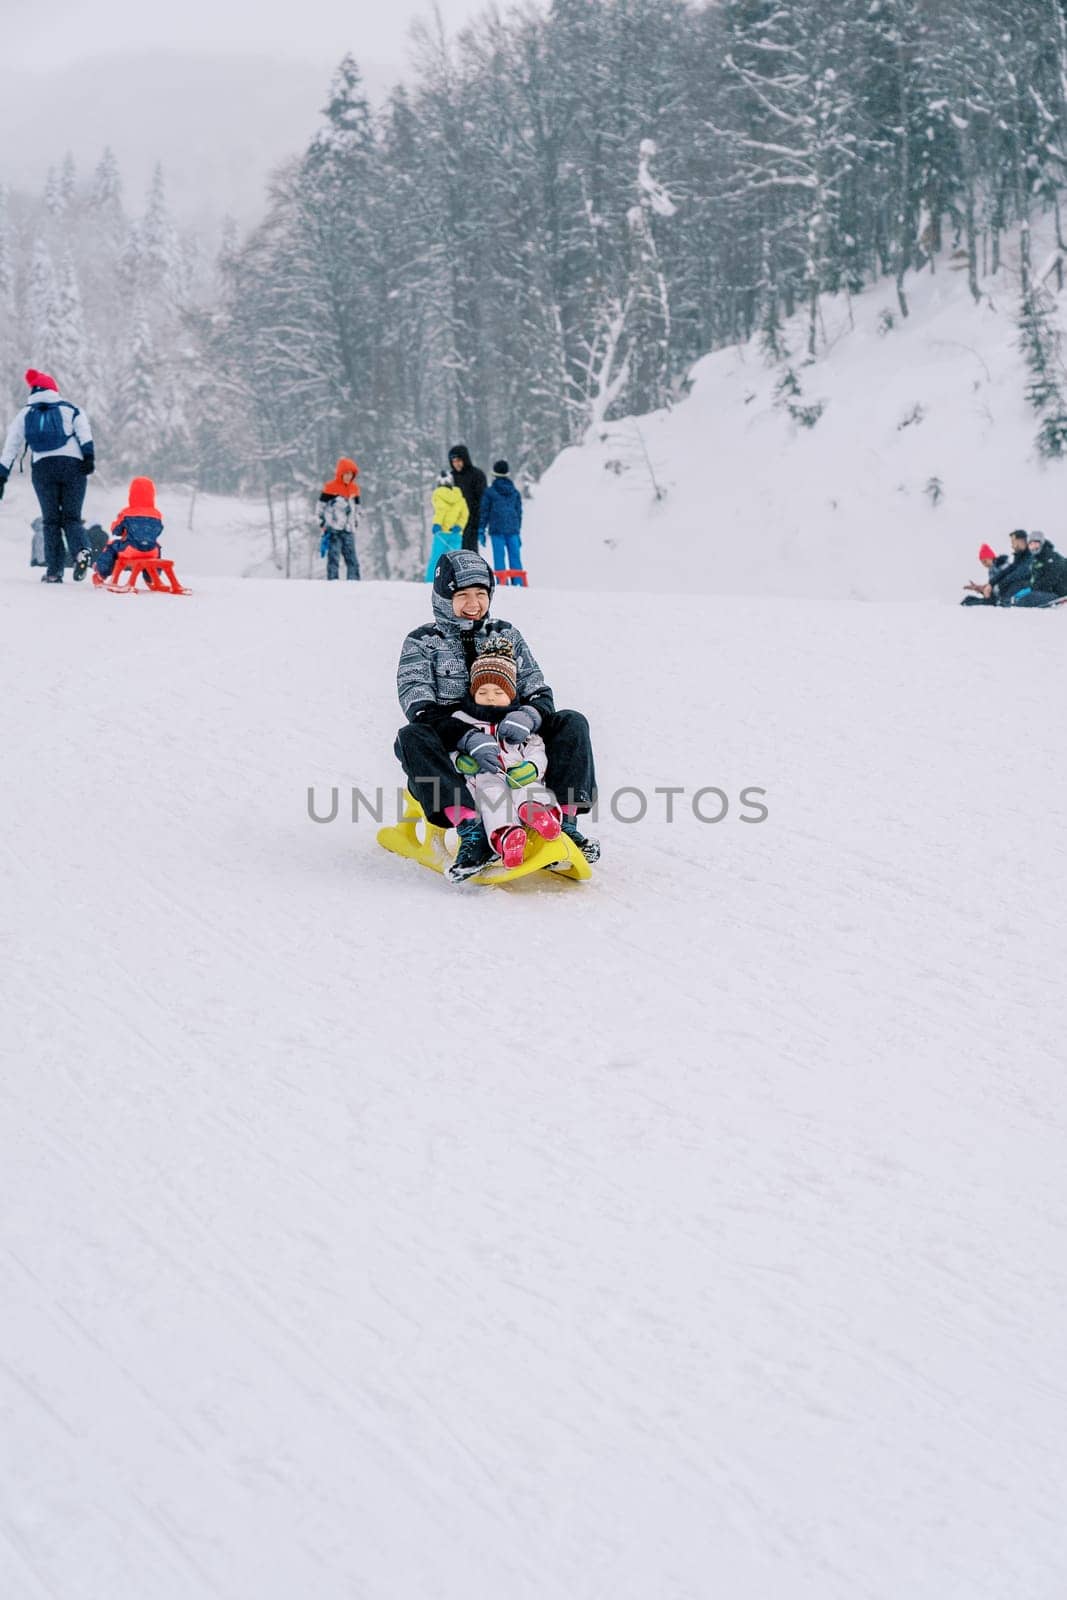 Smiling mother with a small child goes down the slope of a snowy mountain on a sled. High quality photo